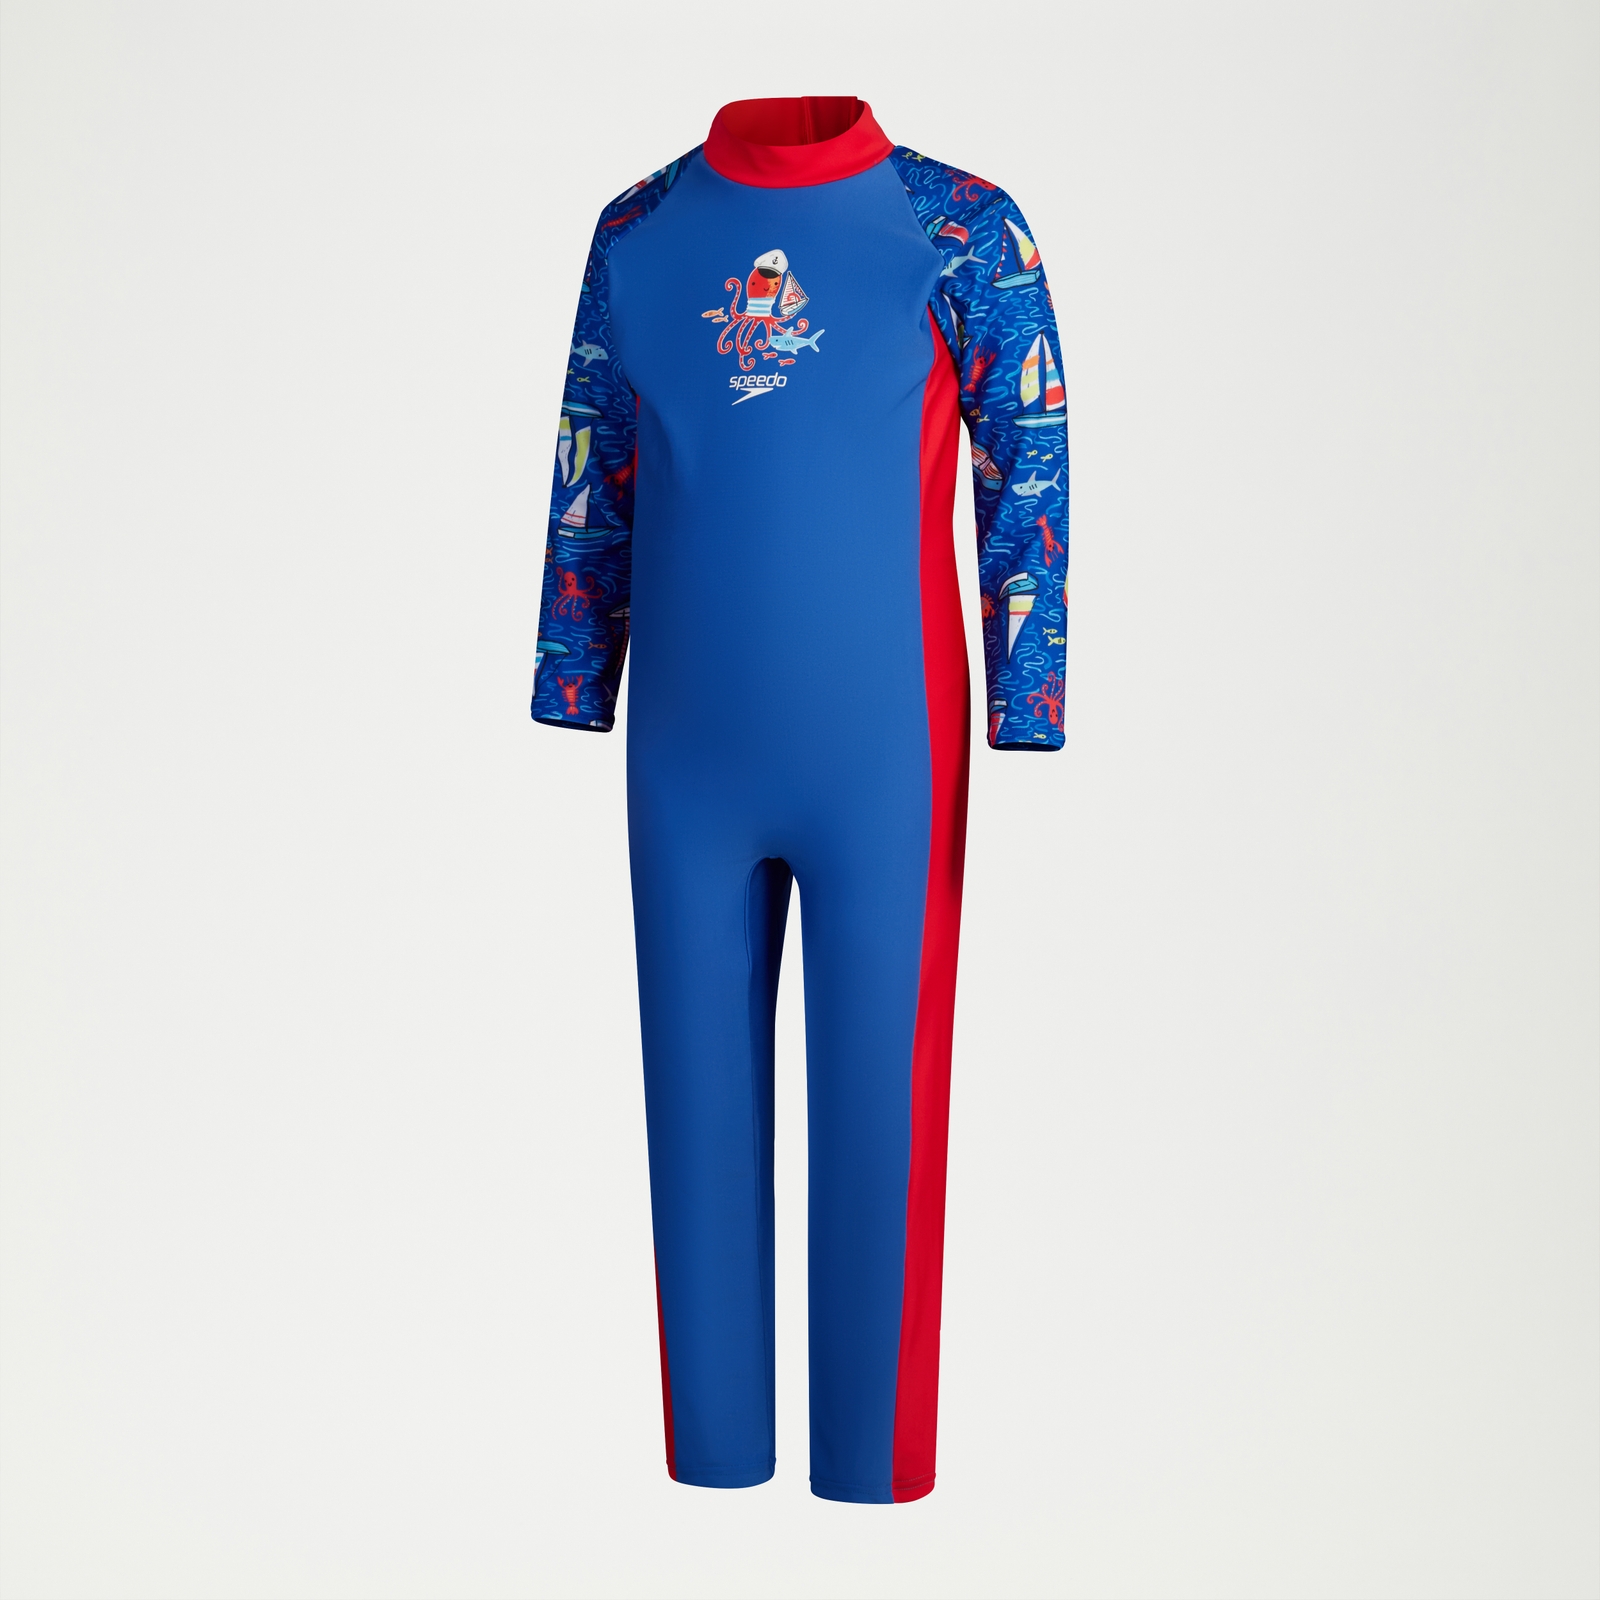 Boys Printed All-in-One Sun Suit Blue/Red